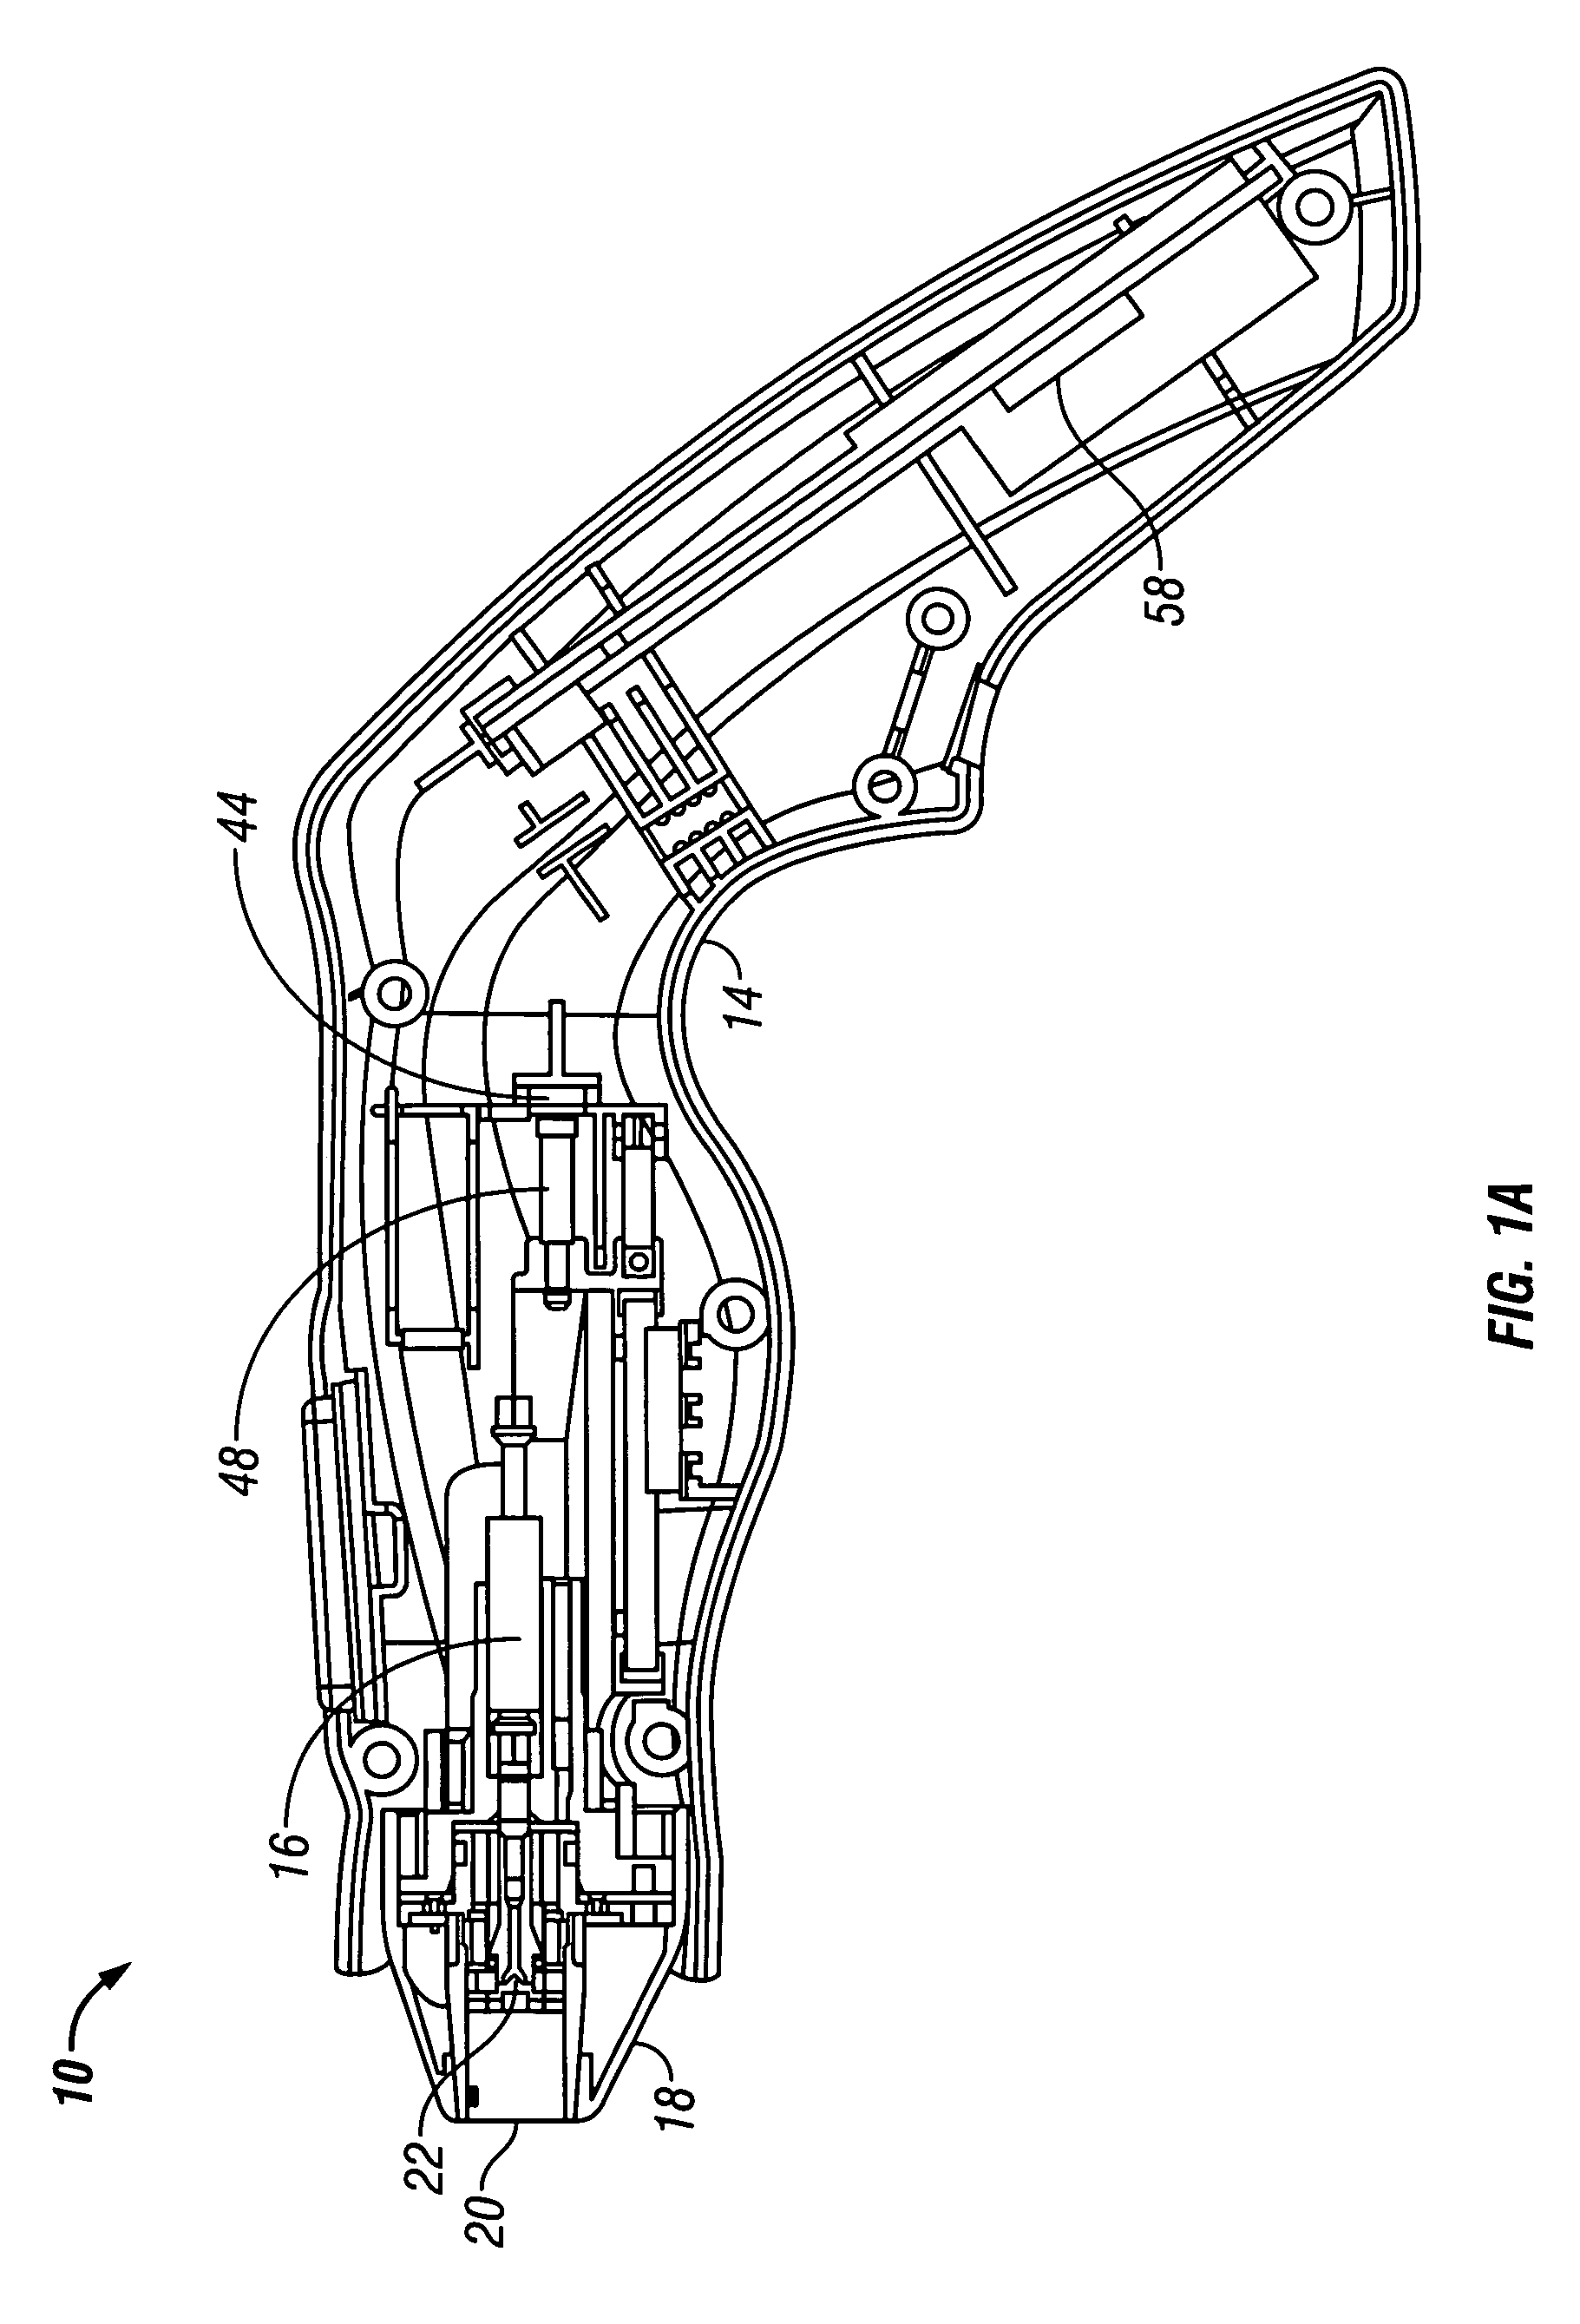 Handpiece with electrode and non-volatile memory